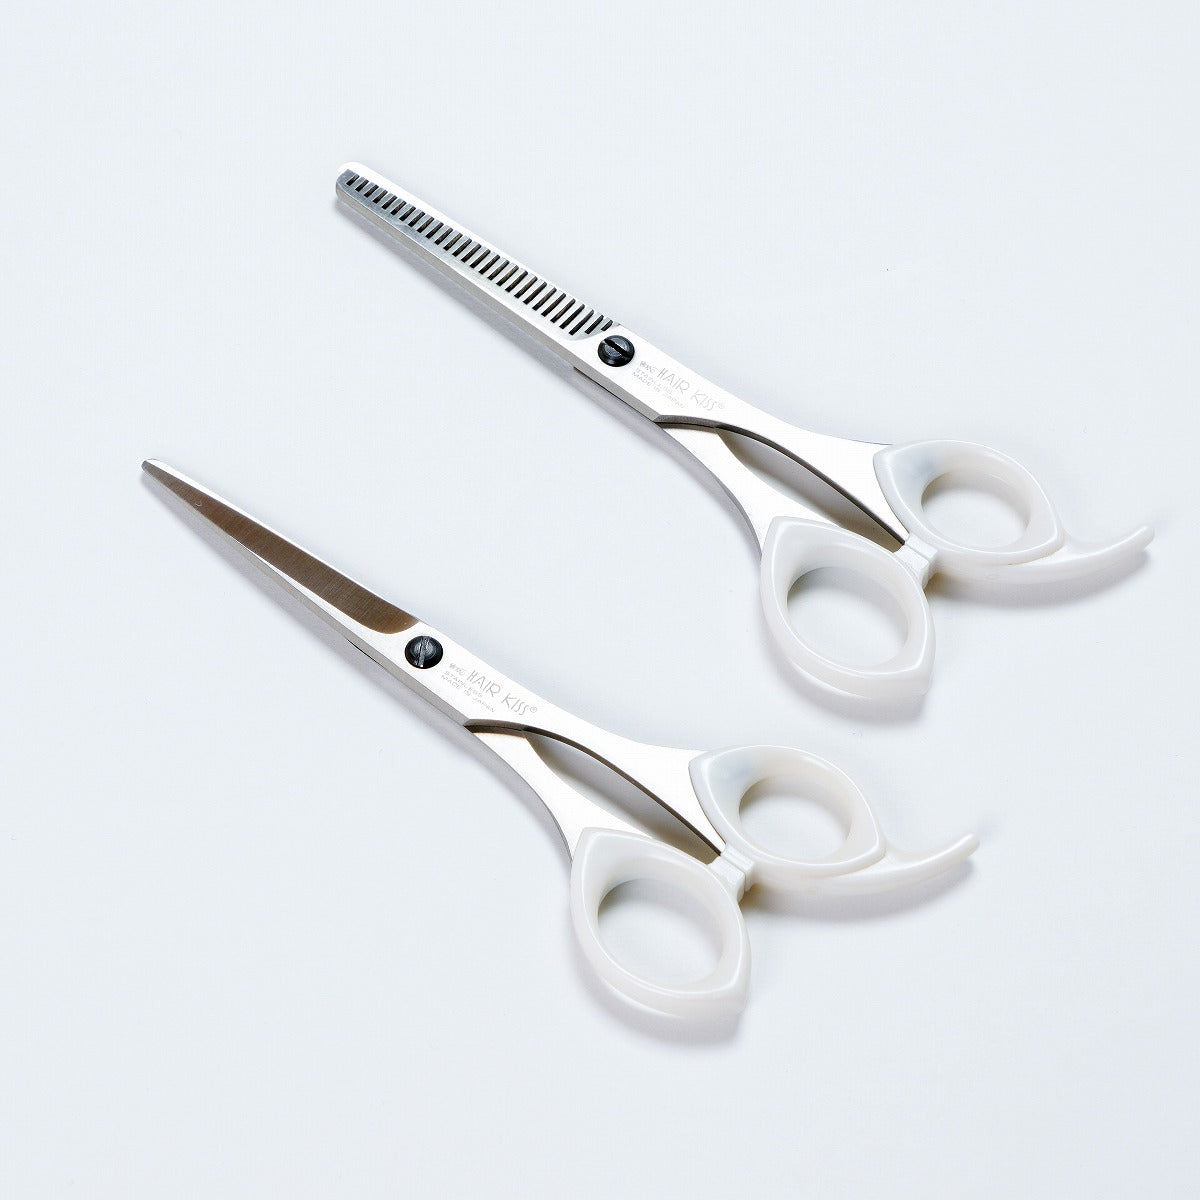 Haircut & Thinning Scissors Set "HAIR KISS" Made from Stainless Steel, For Right Hander